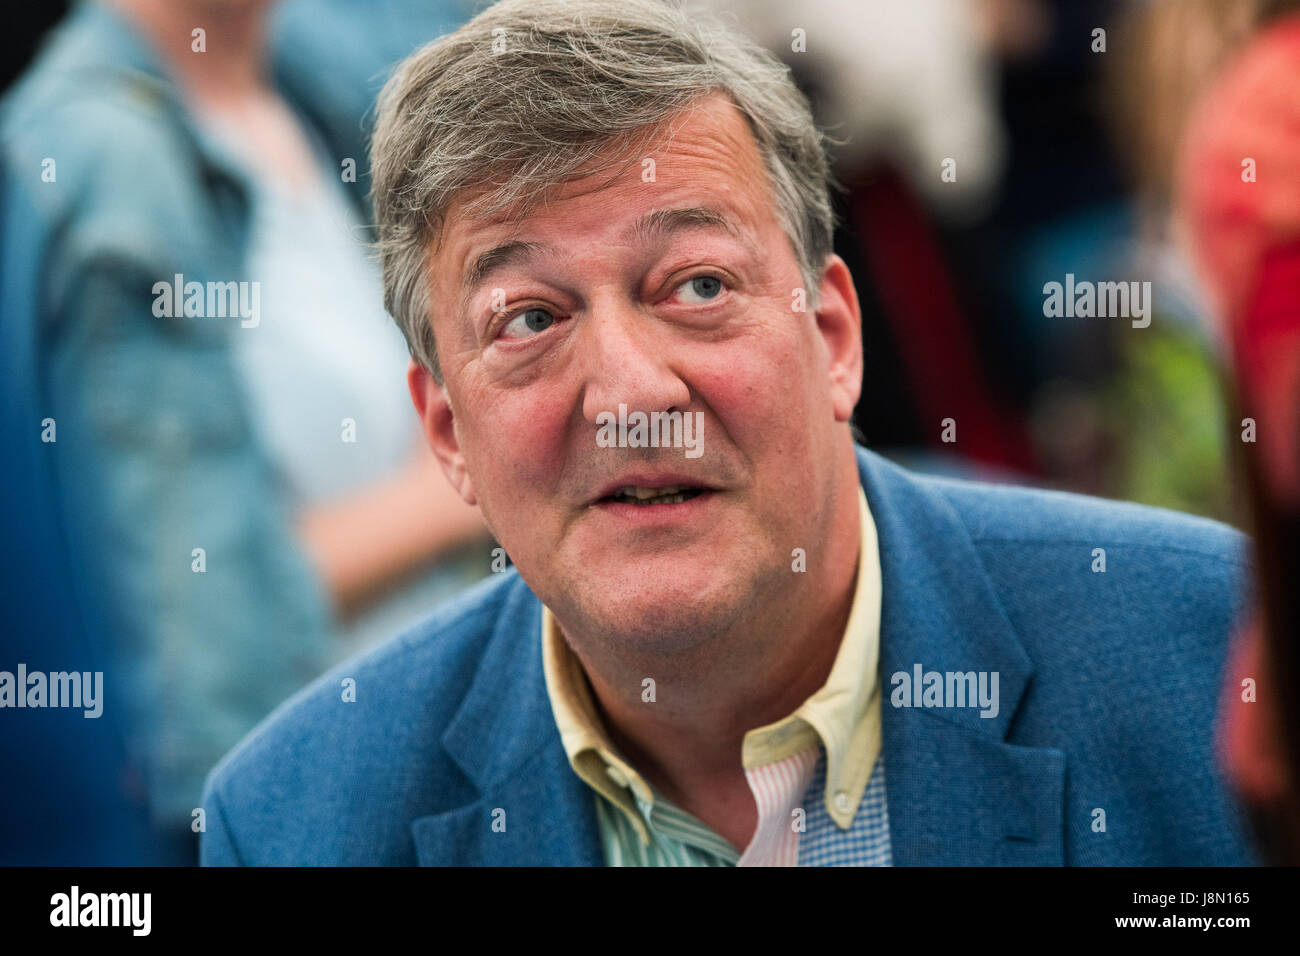 Hay Festival, Wales UK, Monday 29 May 2017 Actor, comedian and author STEPHEN FRY signing copies of his books at the 2017 Hay Literature Festival. Now in its 30th year, the festival draws tens of thousand of visitors a day to what was described by former US president Bill Clinton as 'the woodstock of the mind' Photo credit Credit: keith morris/Alamy Live News Stock Photo